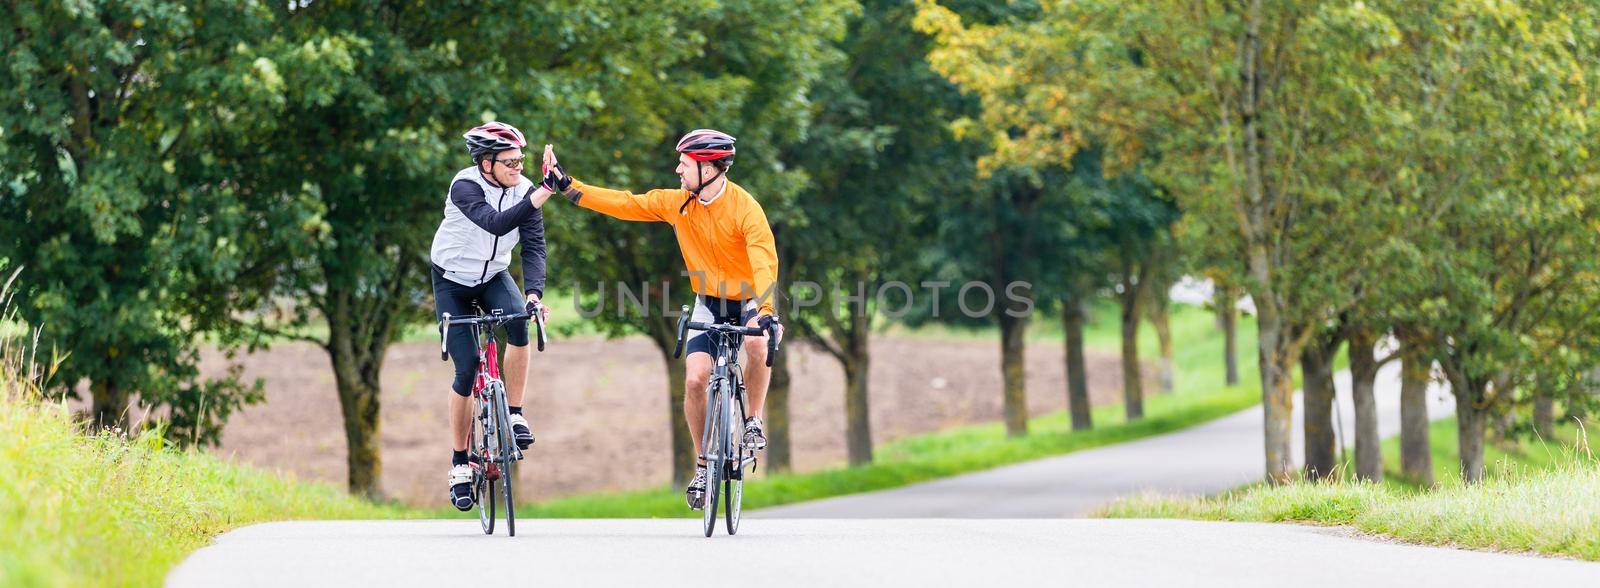 Racing cyclists after sport and giving high five by Kzenon